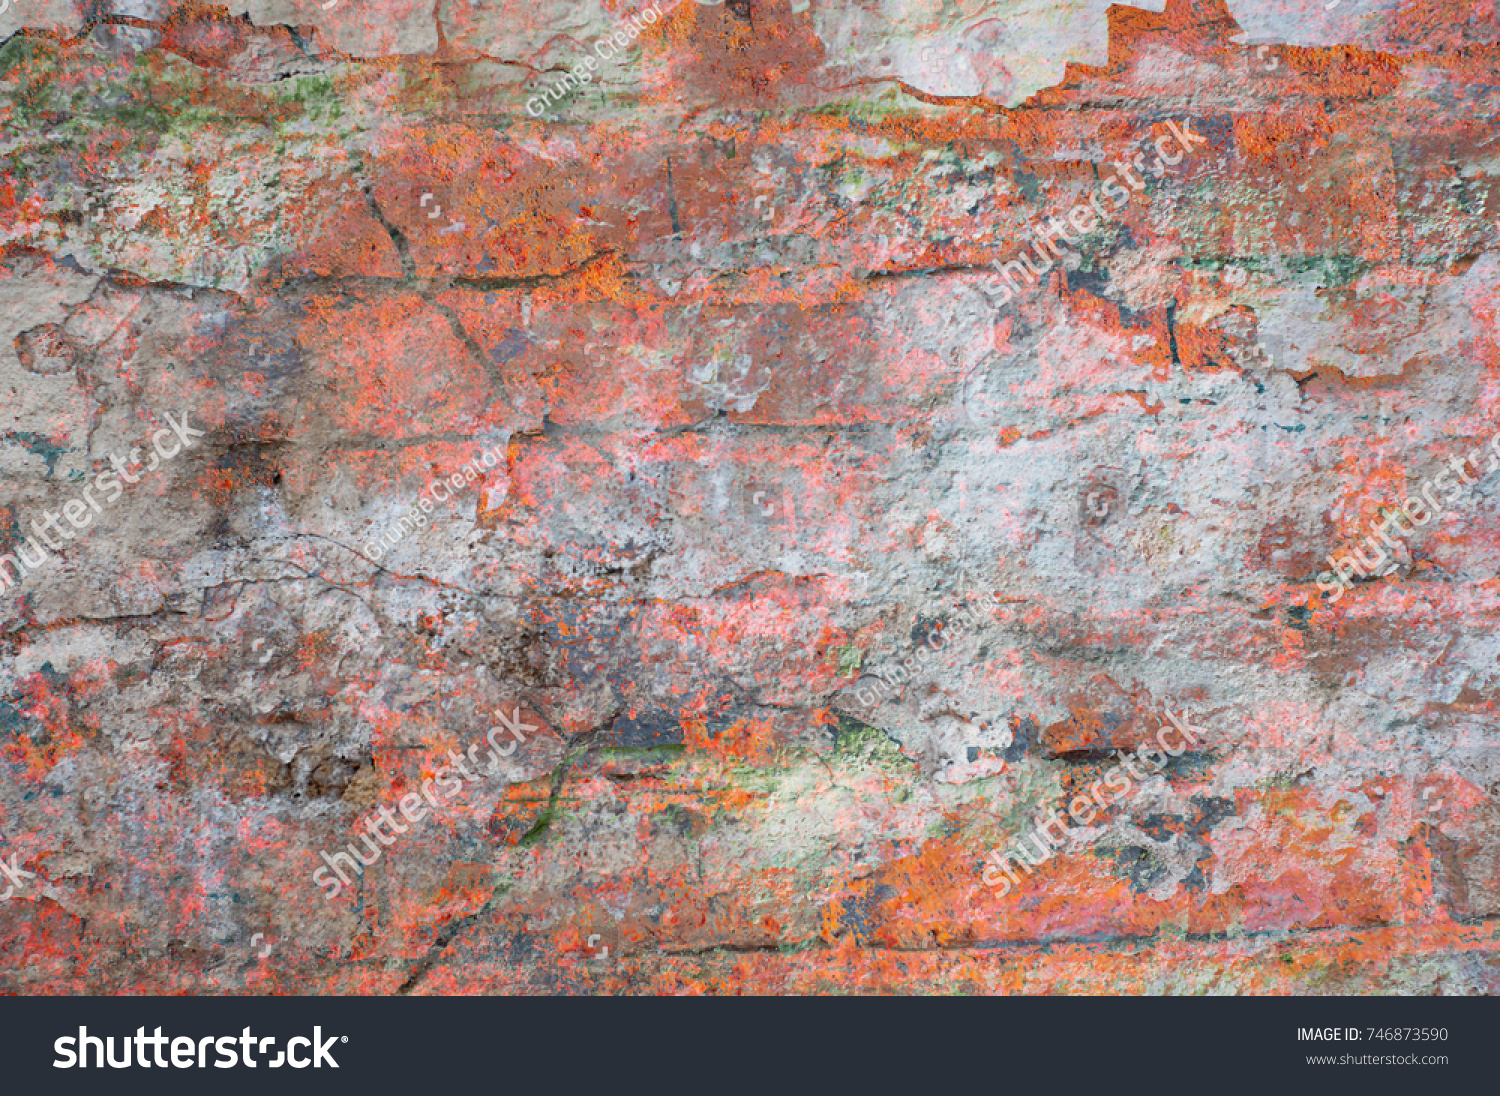 Abstract multicolor grunge background with abstract colored texture. Various color pattern elements. Old  vintage scratches, stain, paint splats, brush strokes, dots, spots. Weathered wall backdrop #746873590